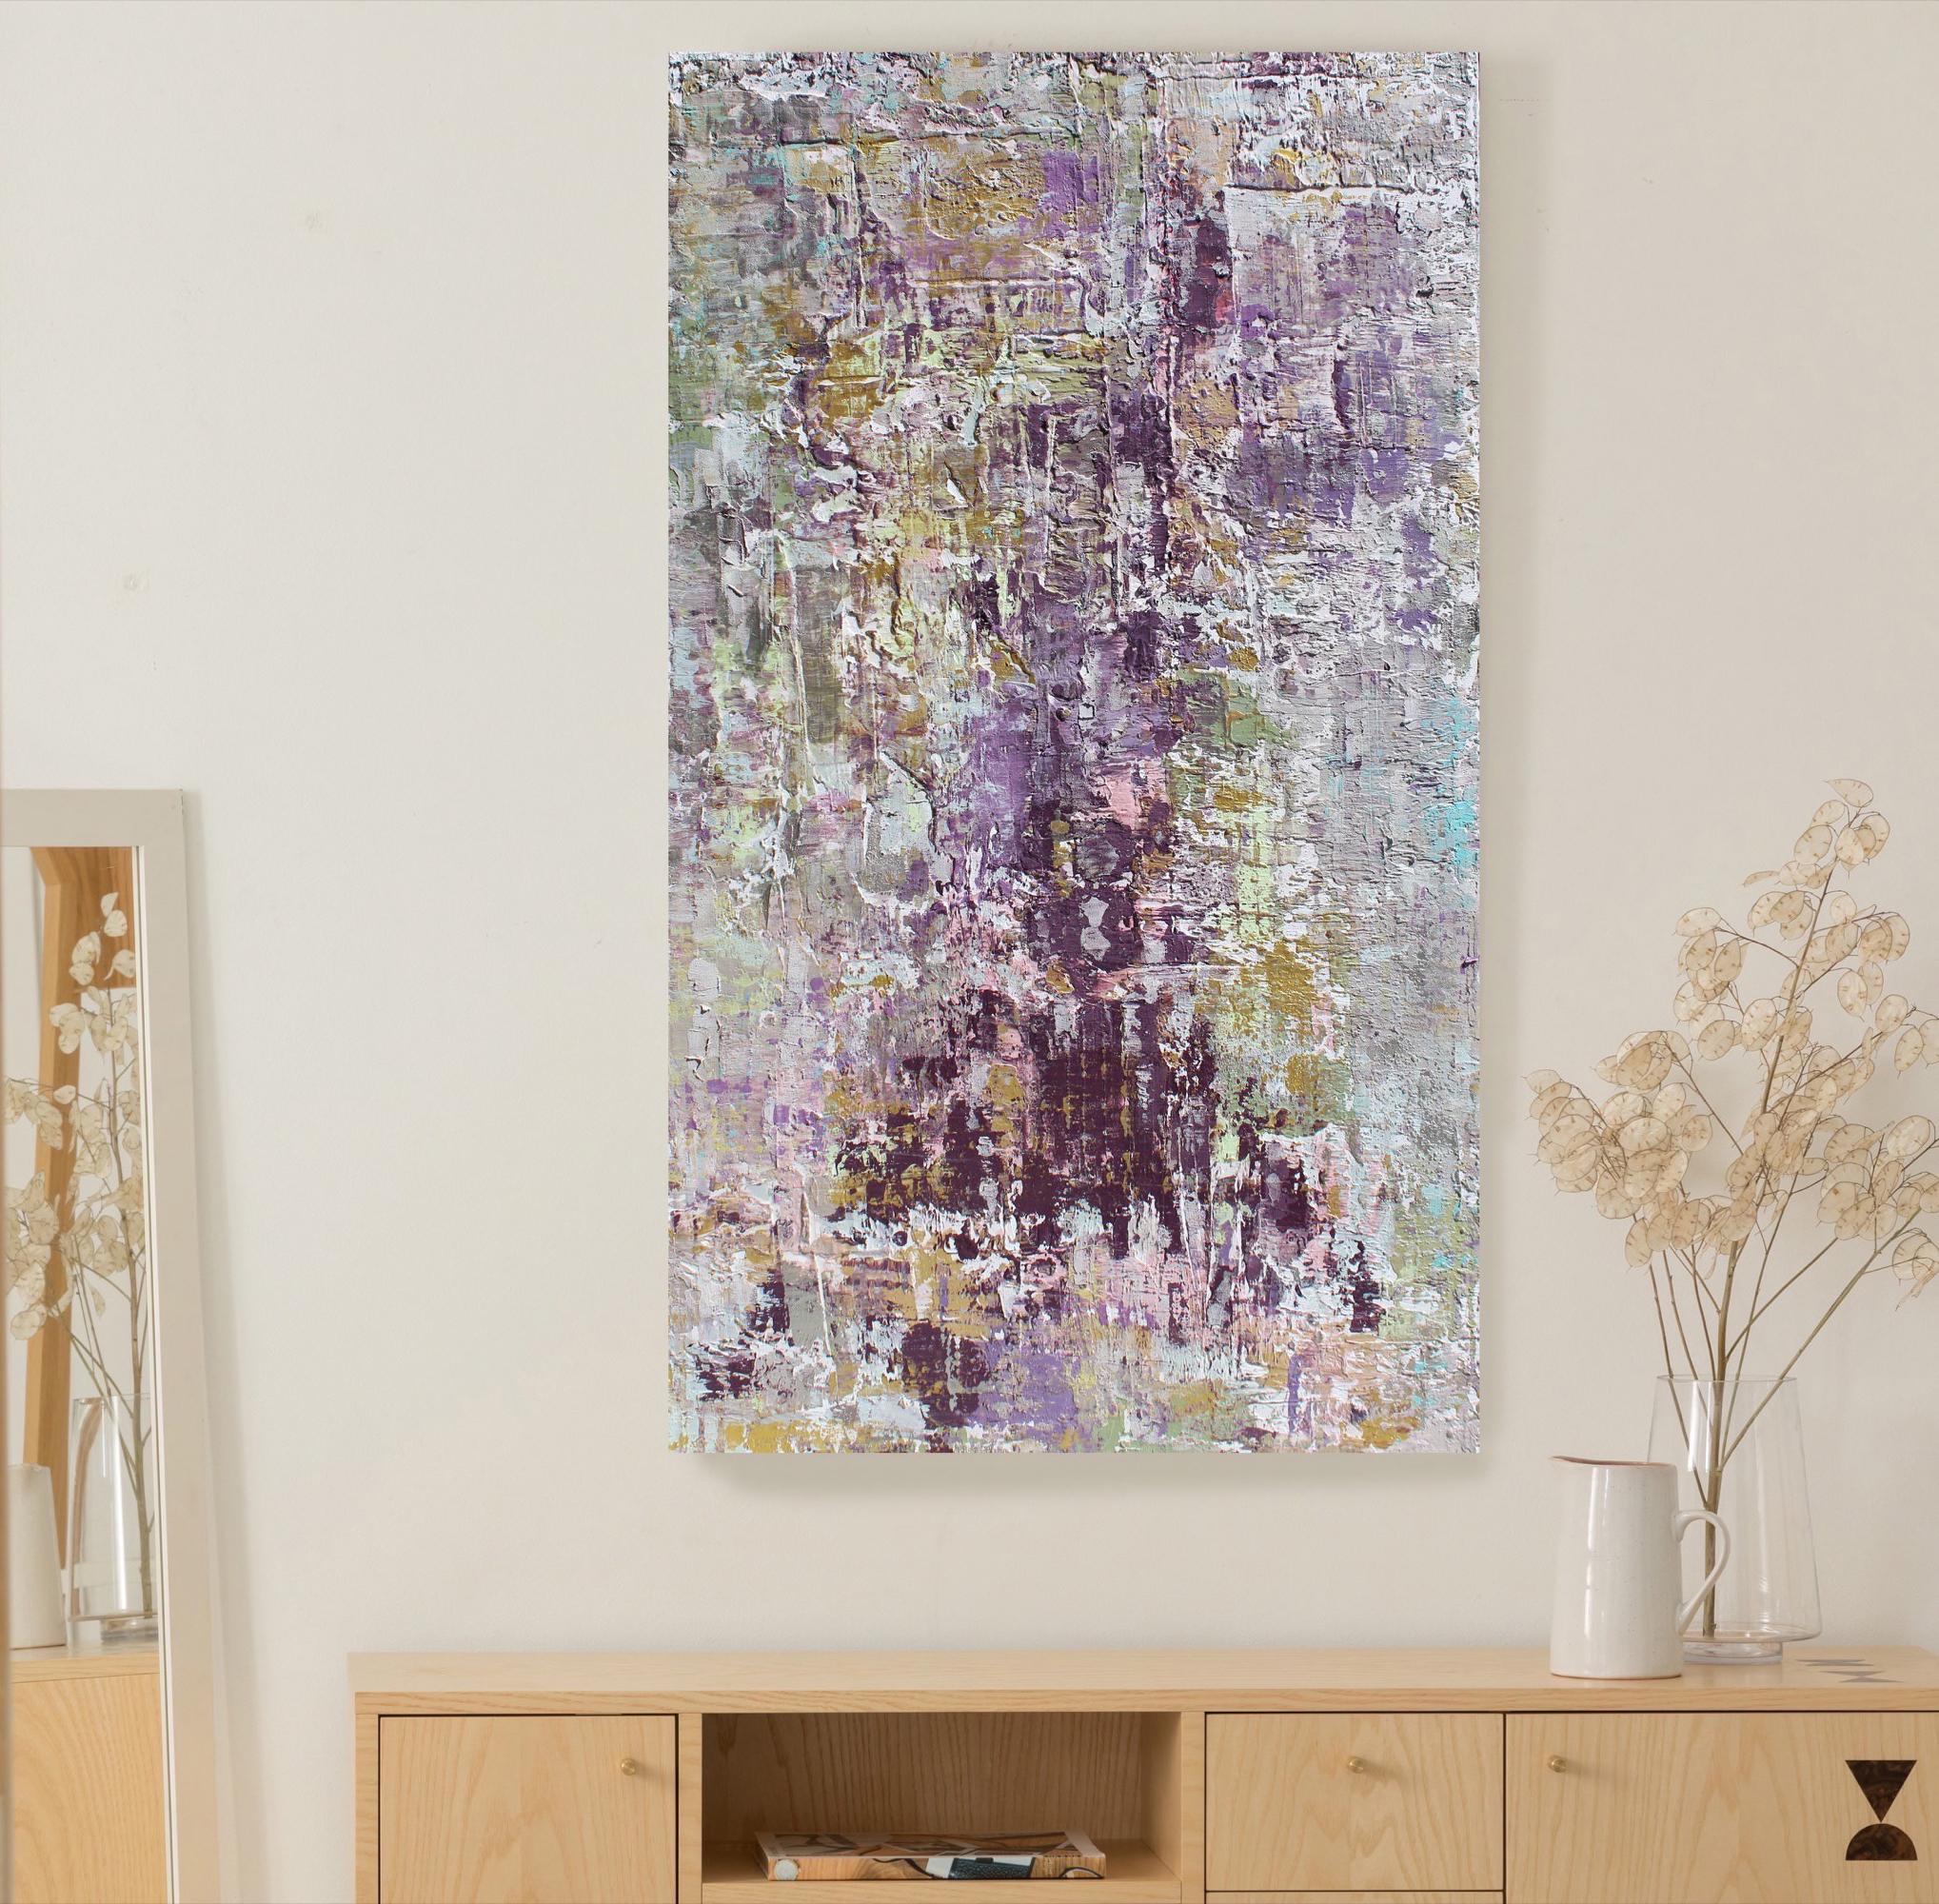 Purple Abstract Mixed Medium on Canvas Heavy Textured, Calm Emotions 24x48